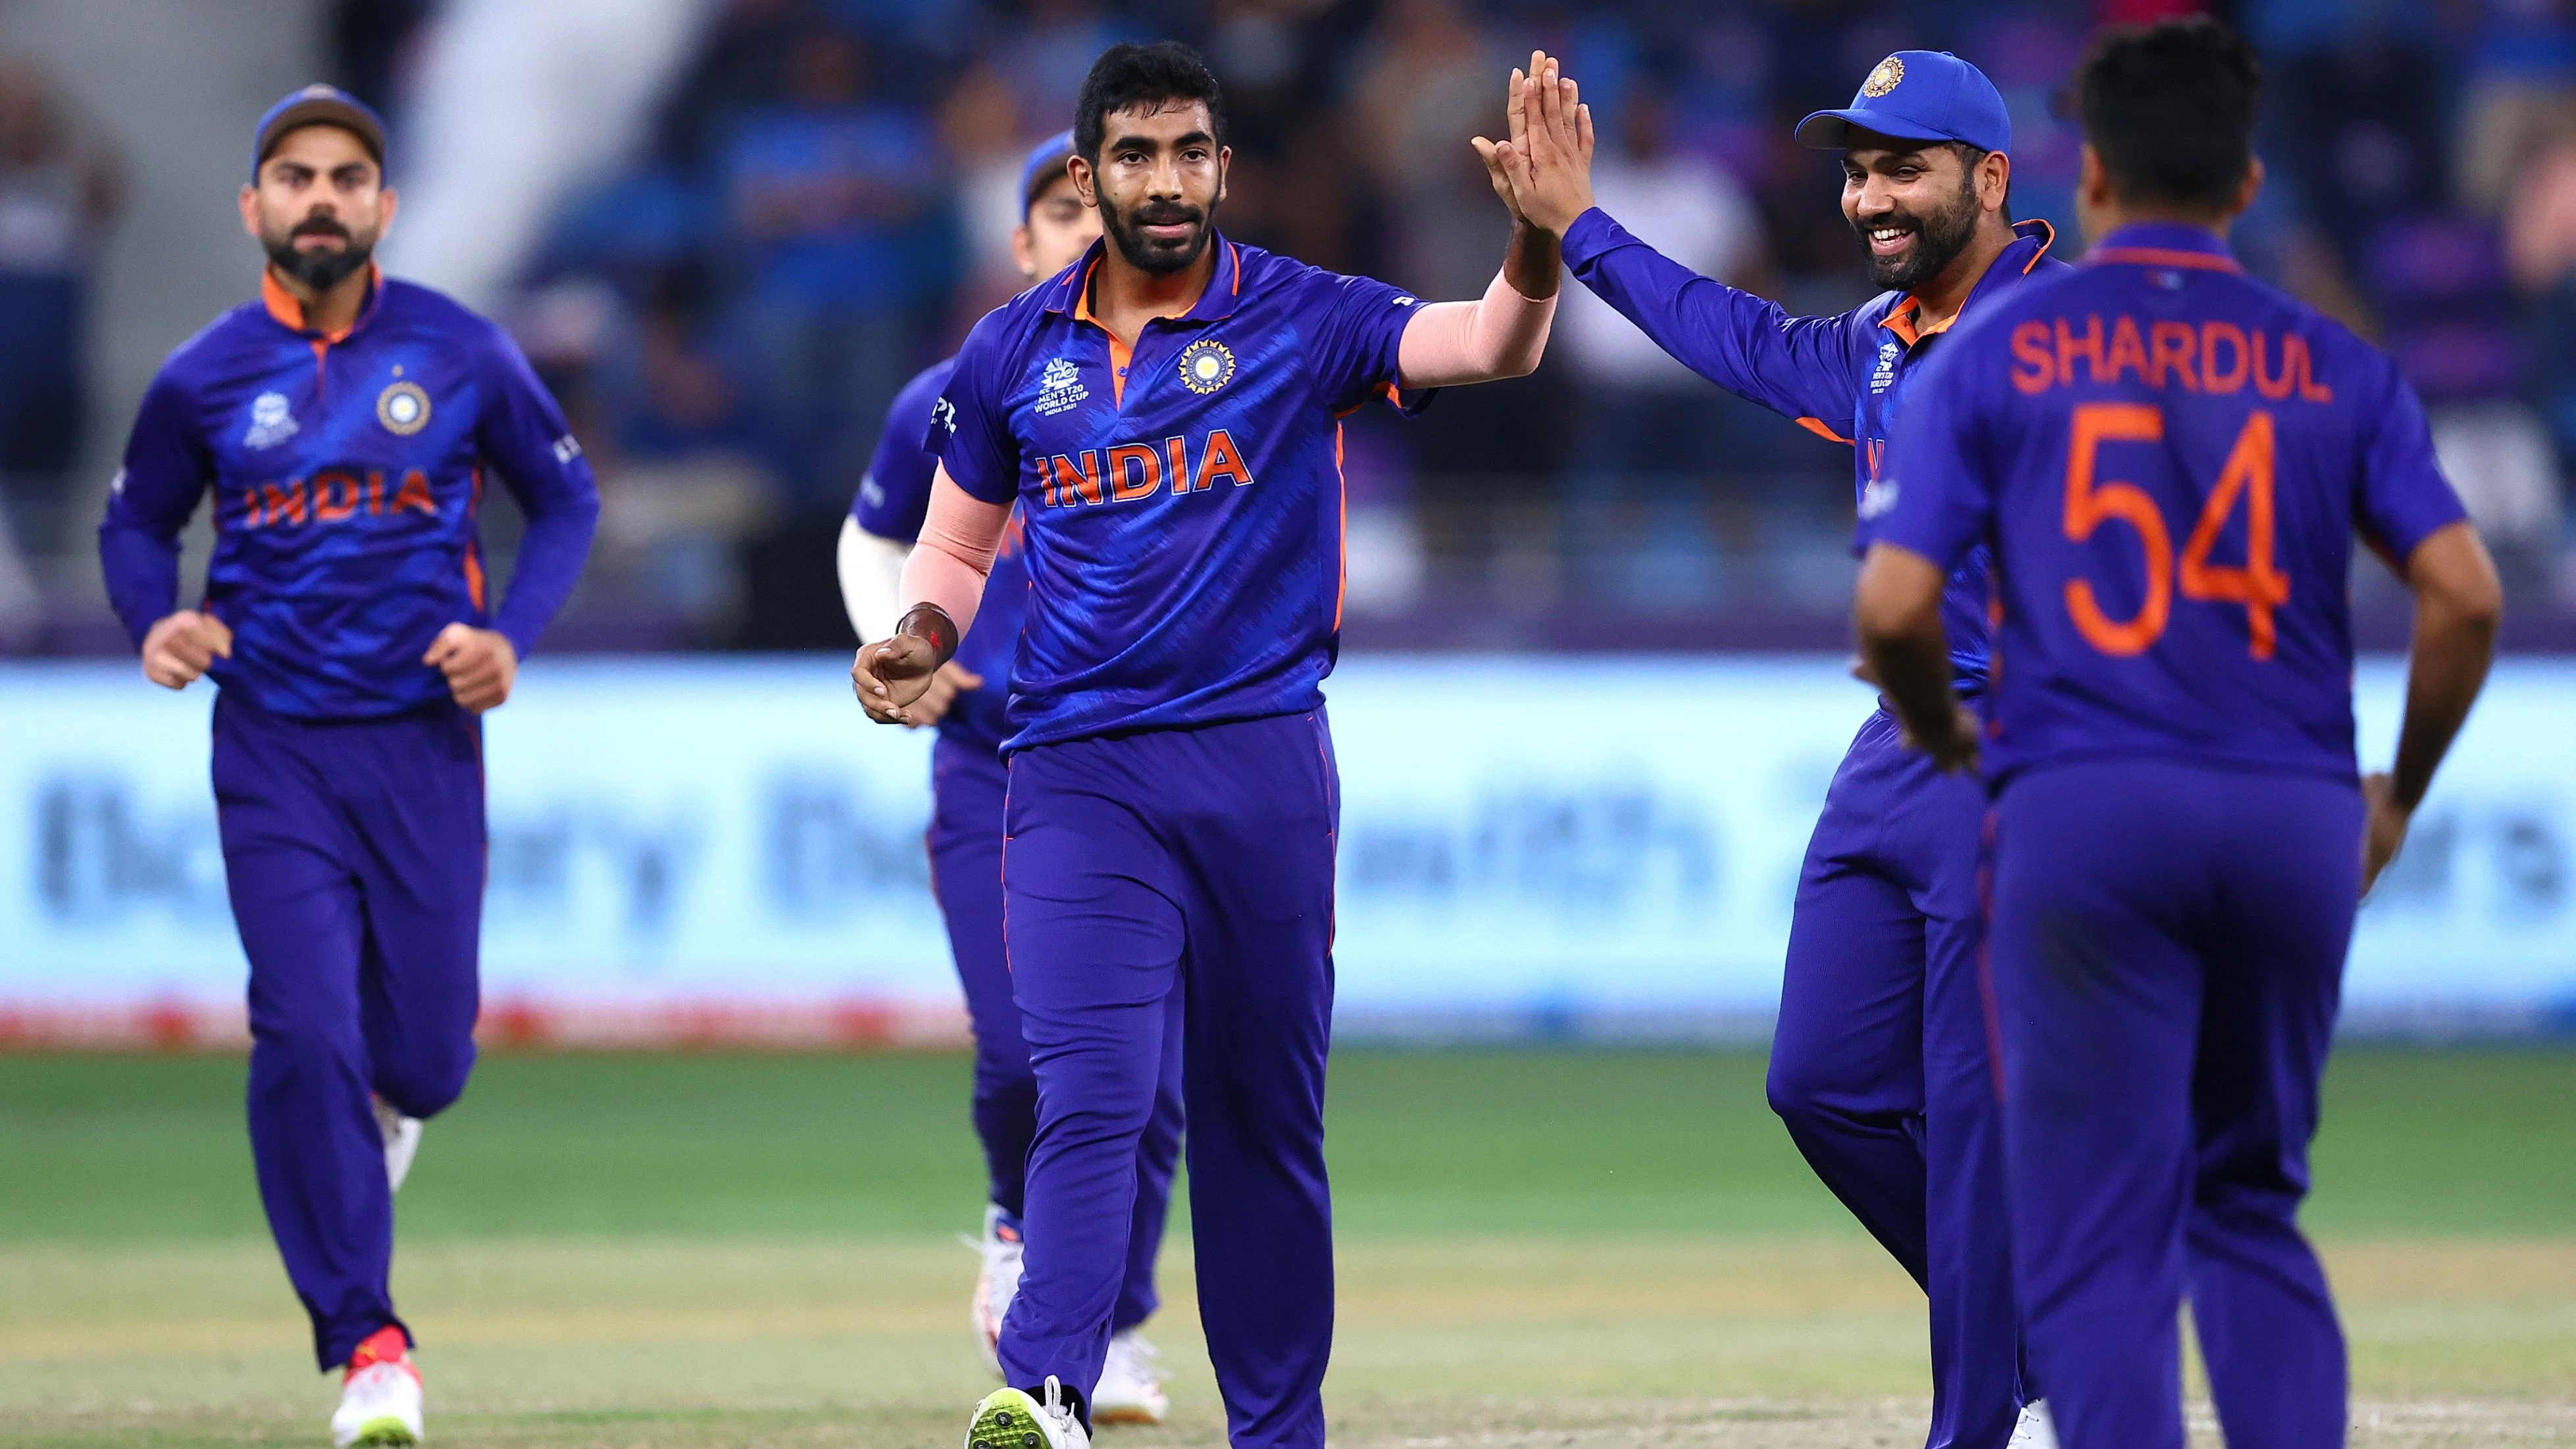 Jasprit Bumrah returns and will be India's vice-captain for both SL T20Is and Tests | Getty